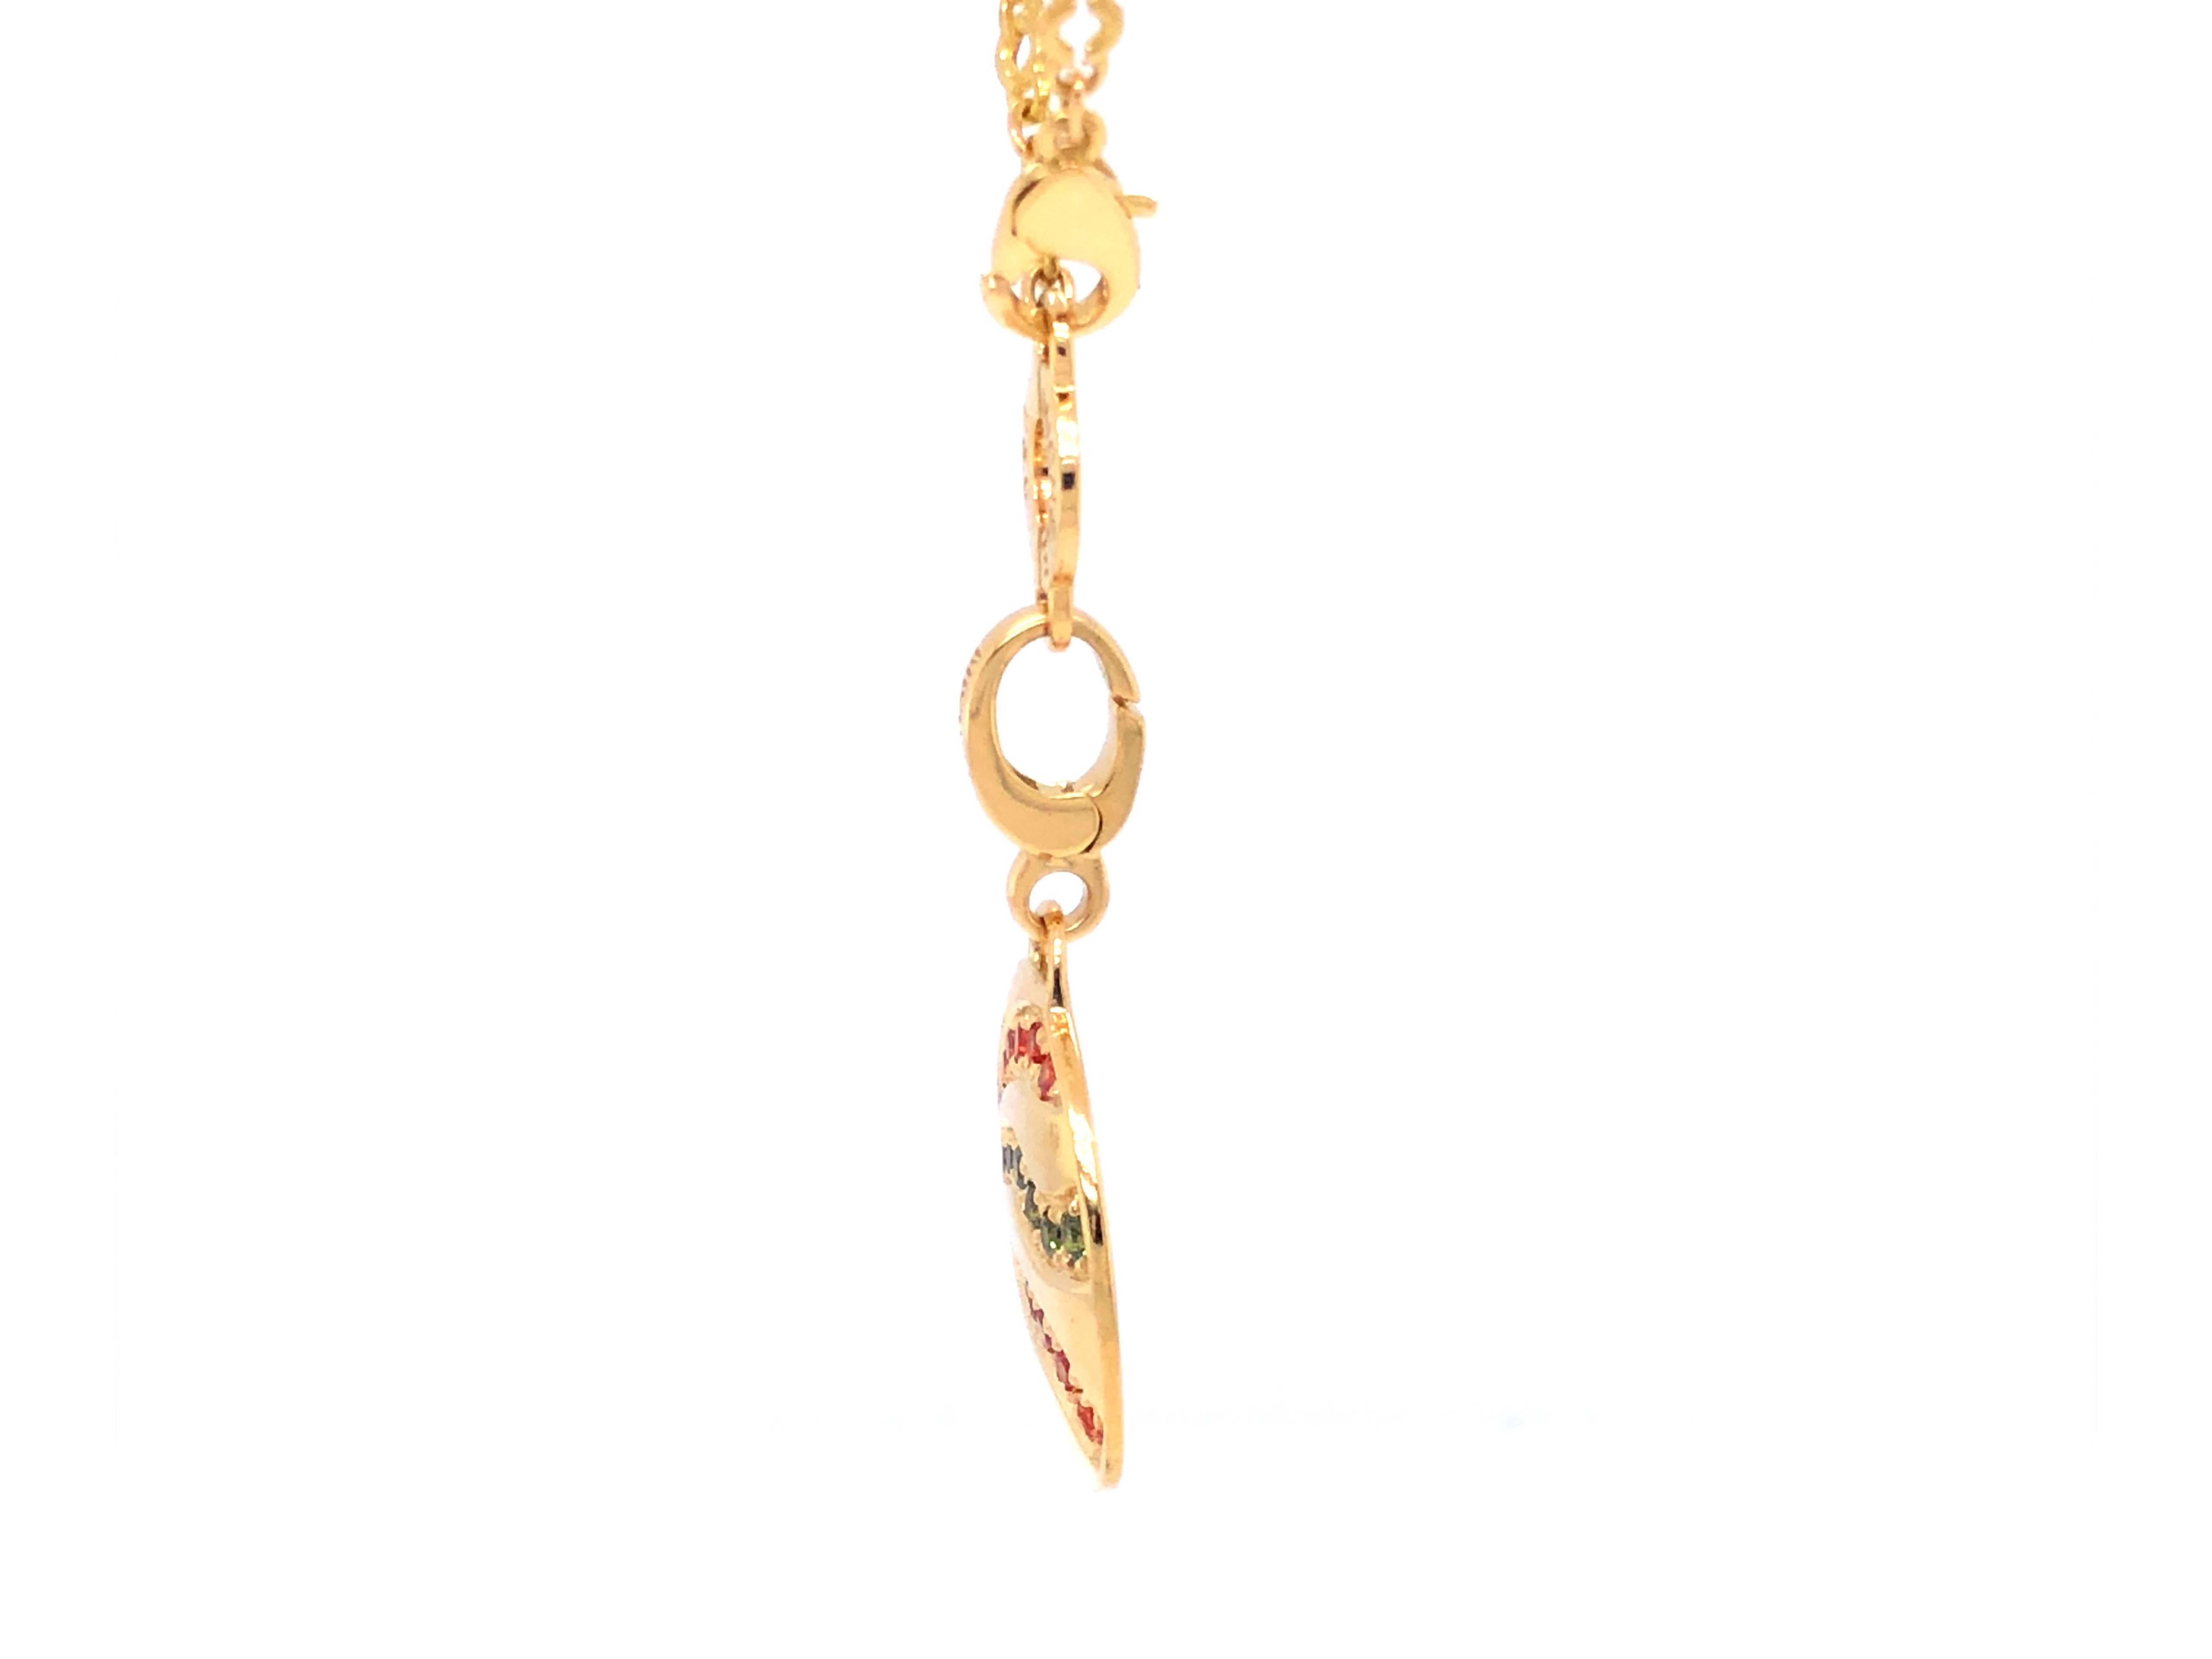 Michele Gold and Garnet Starfish Pendant with Chain, 18k Yellow Gold For Sale 1